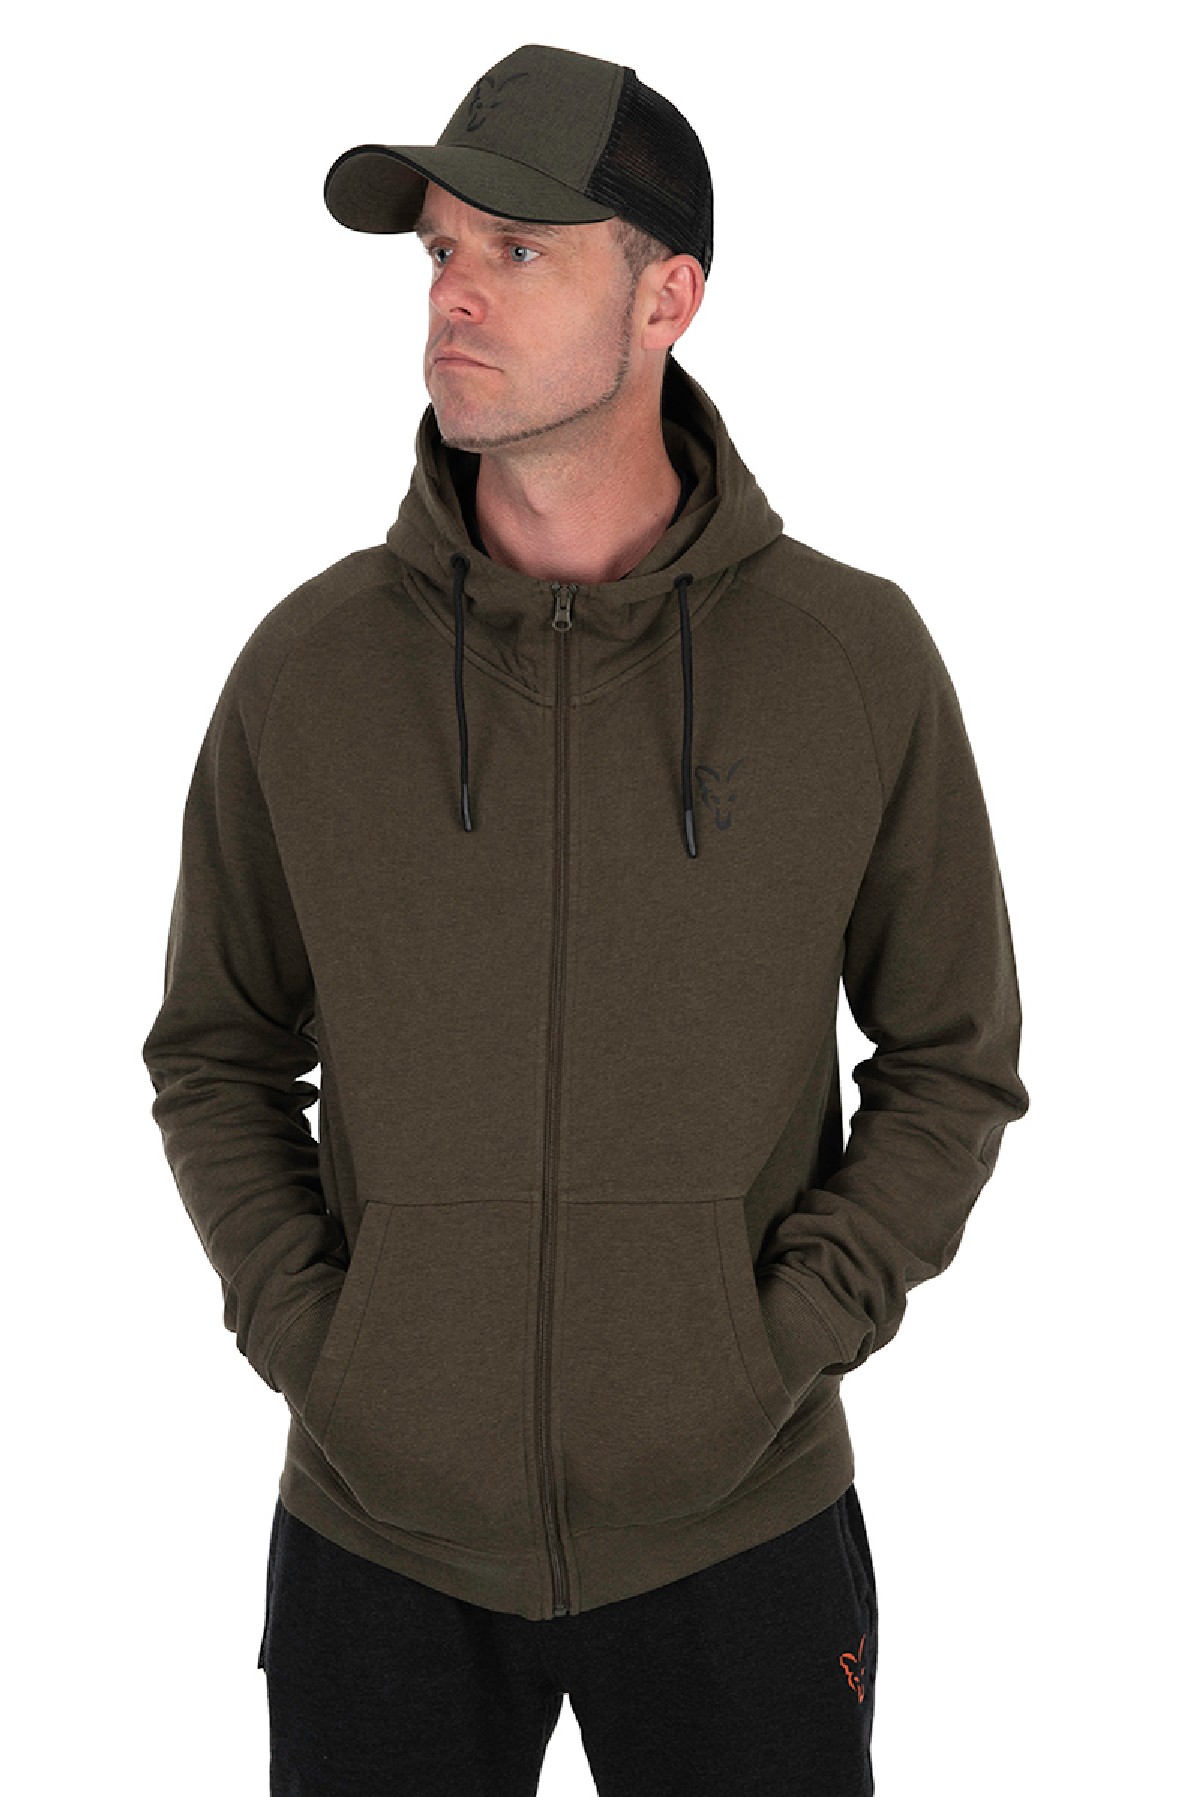 Fox Collection Lightweight Hoody Green & Black Large